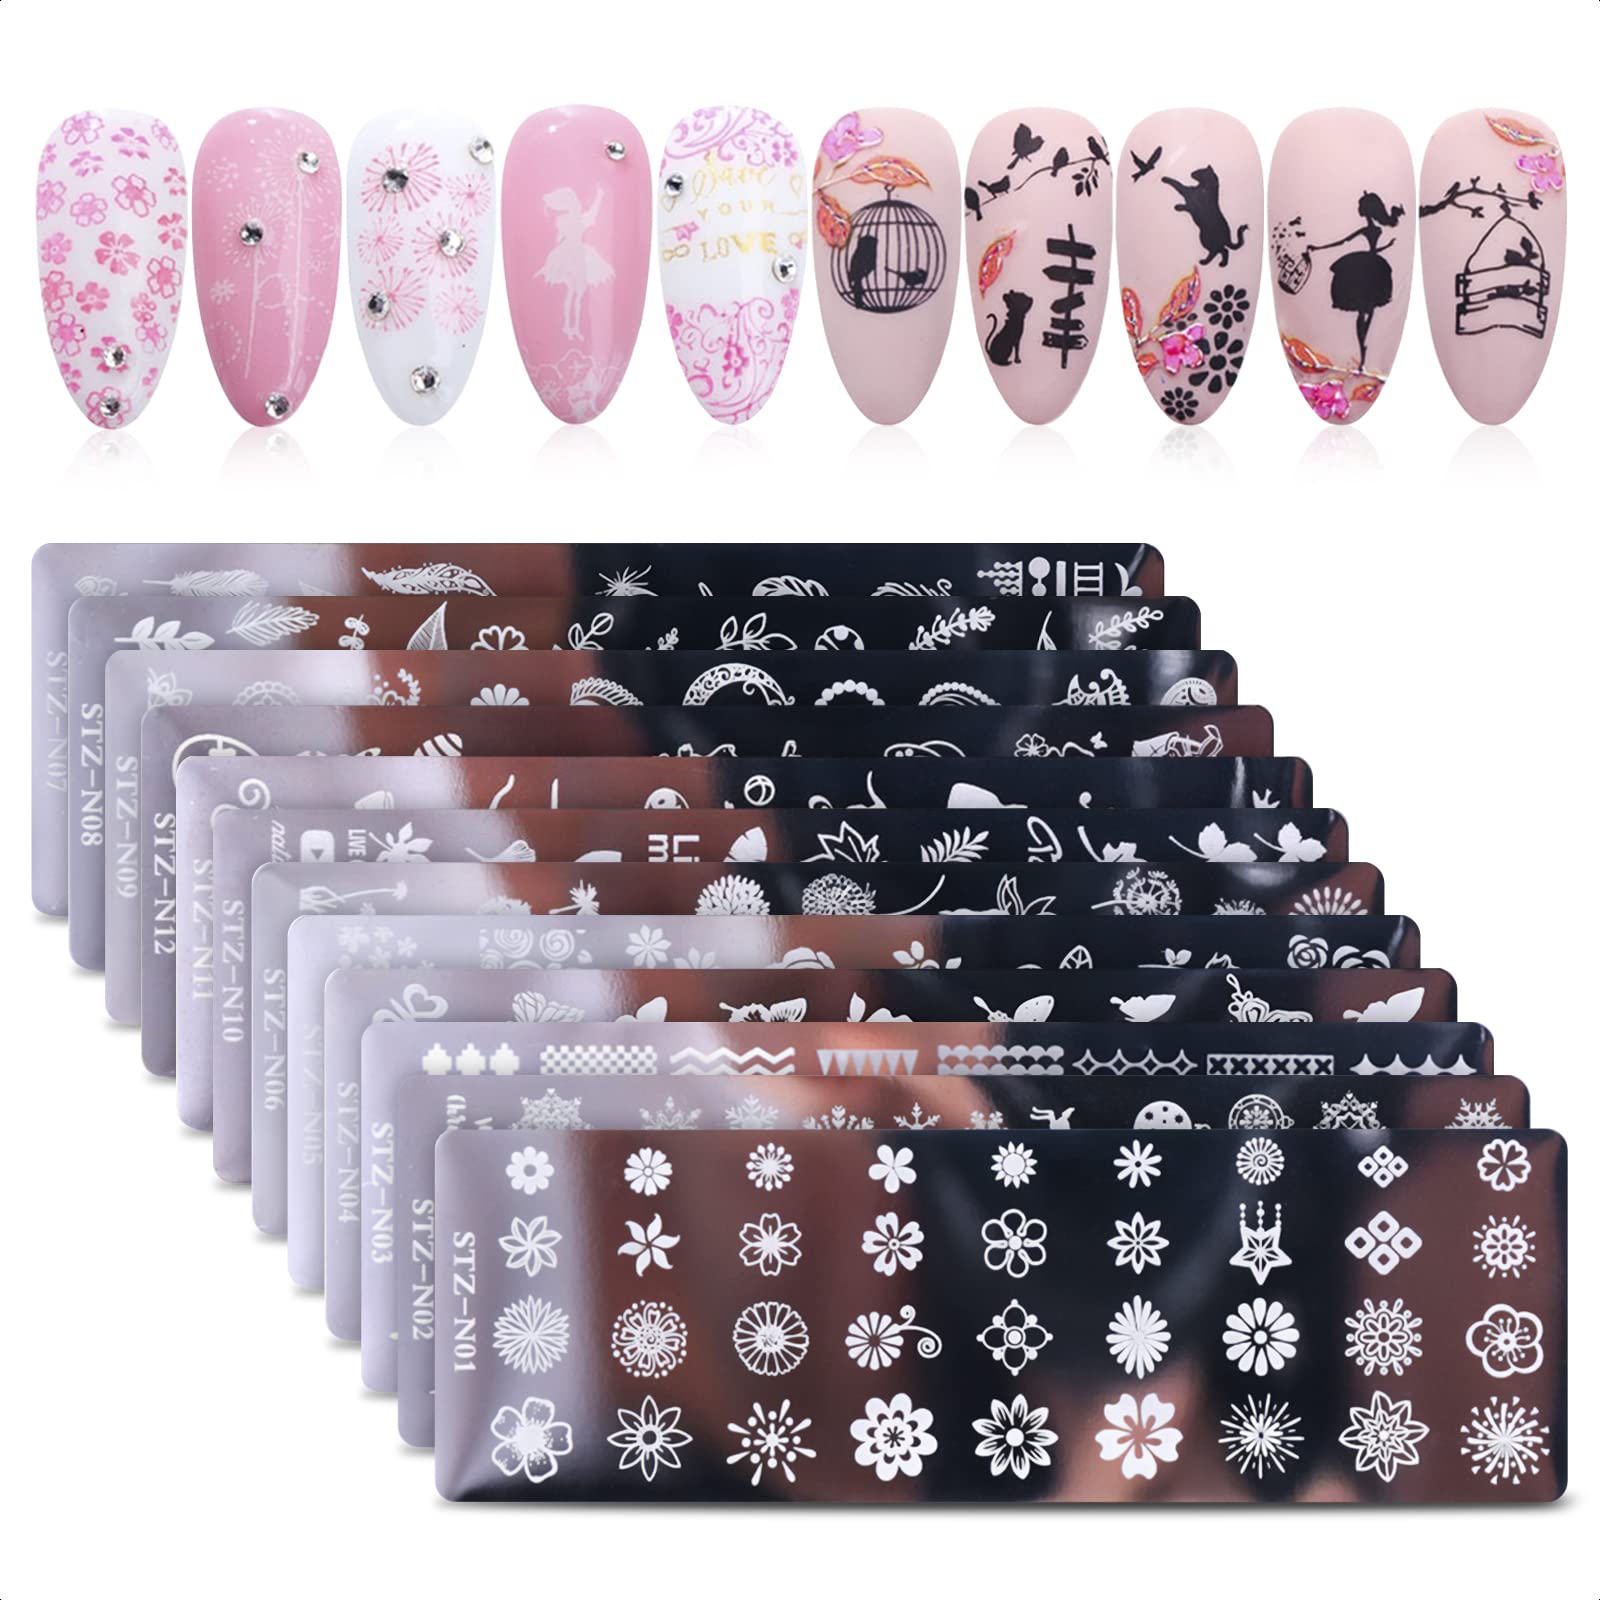 Gel Polish Design Nail Art Stamper - 12Pcs Stamp for Nails Plate Set Stamp  Tool for Nails Flower Beauty Butterfly Stamp Nail Art Kit - Nail Stamper  Animal Print Plates Gift Box